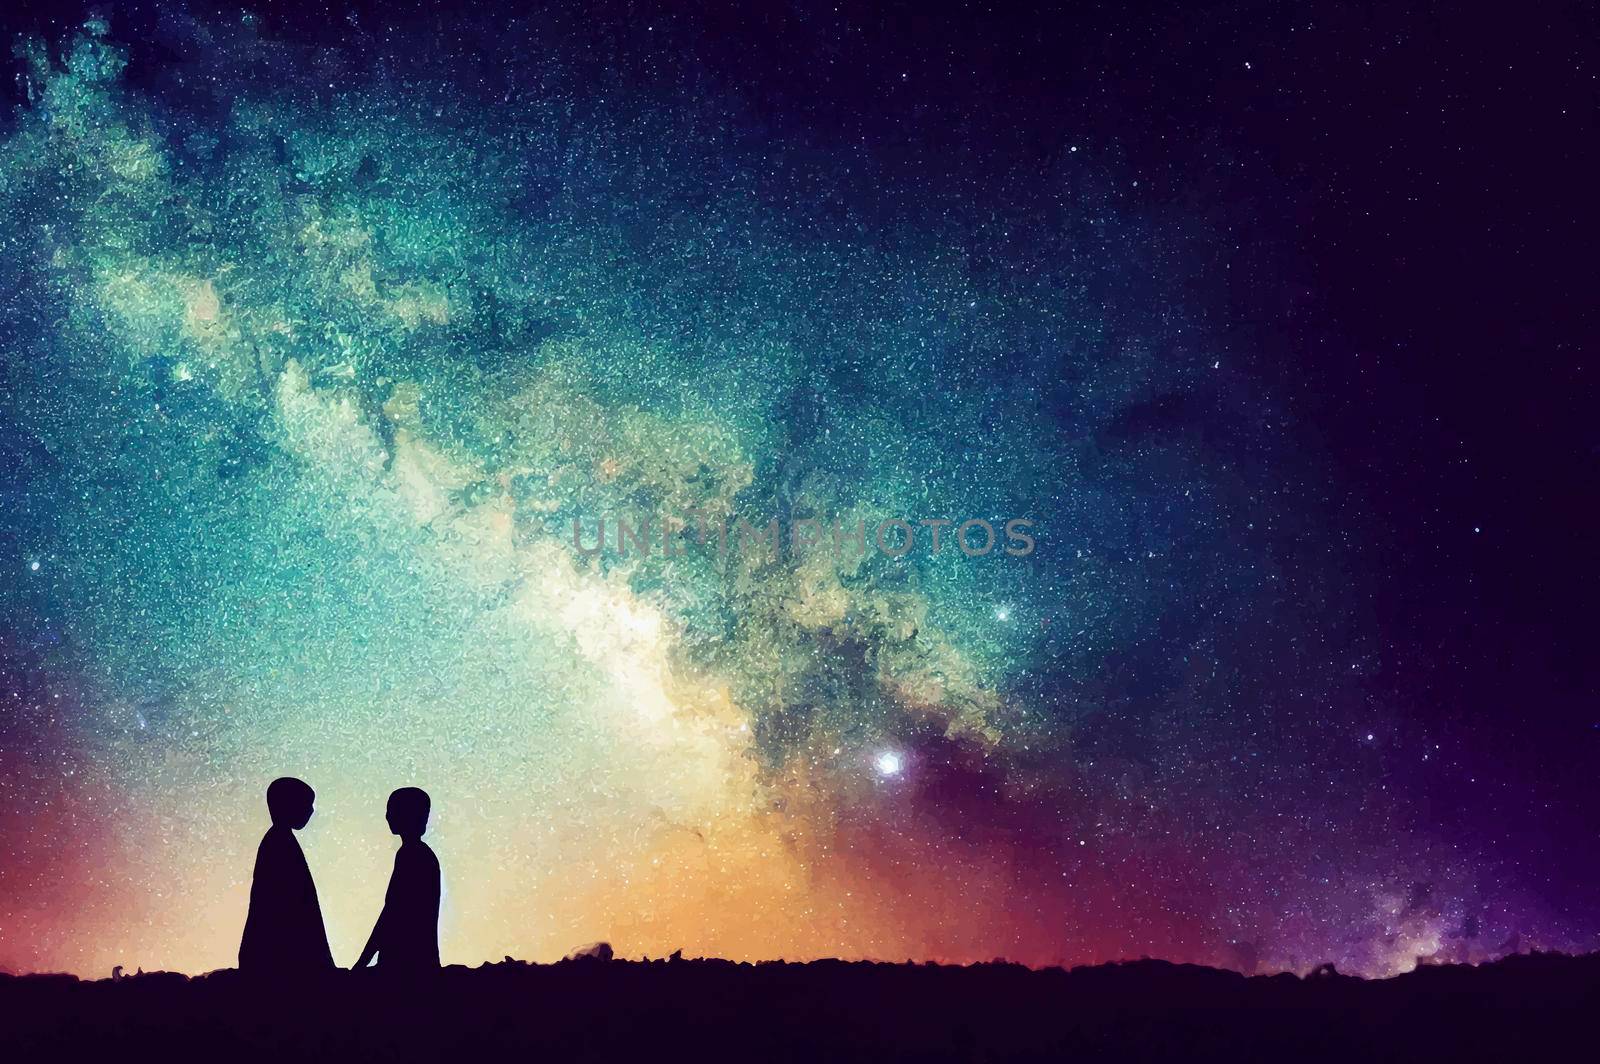 silhouette of couple with night scene milky way background in the galaxy by JpRamos